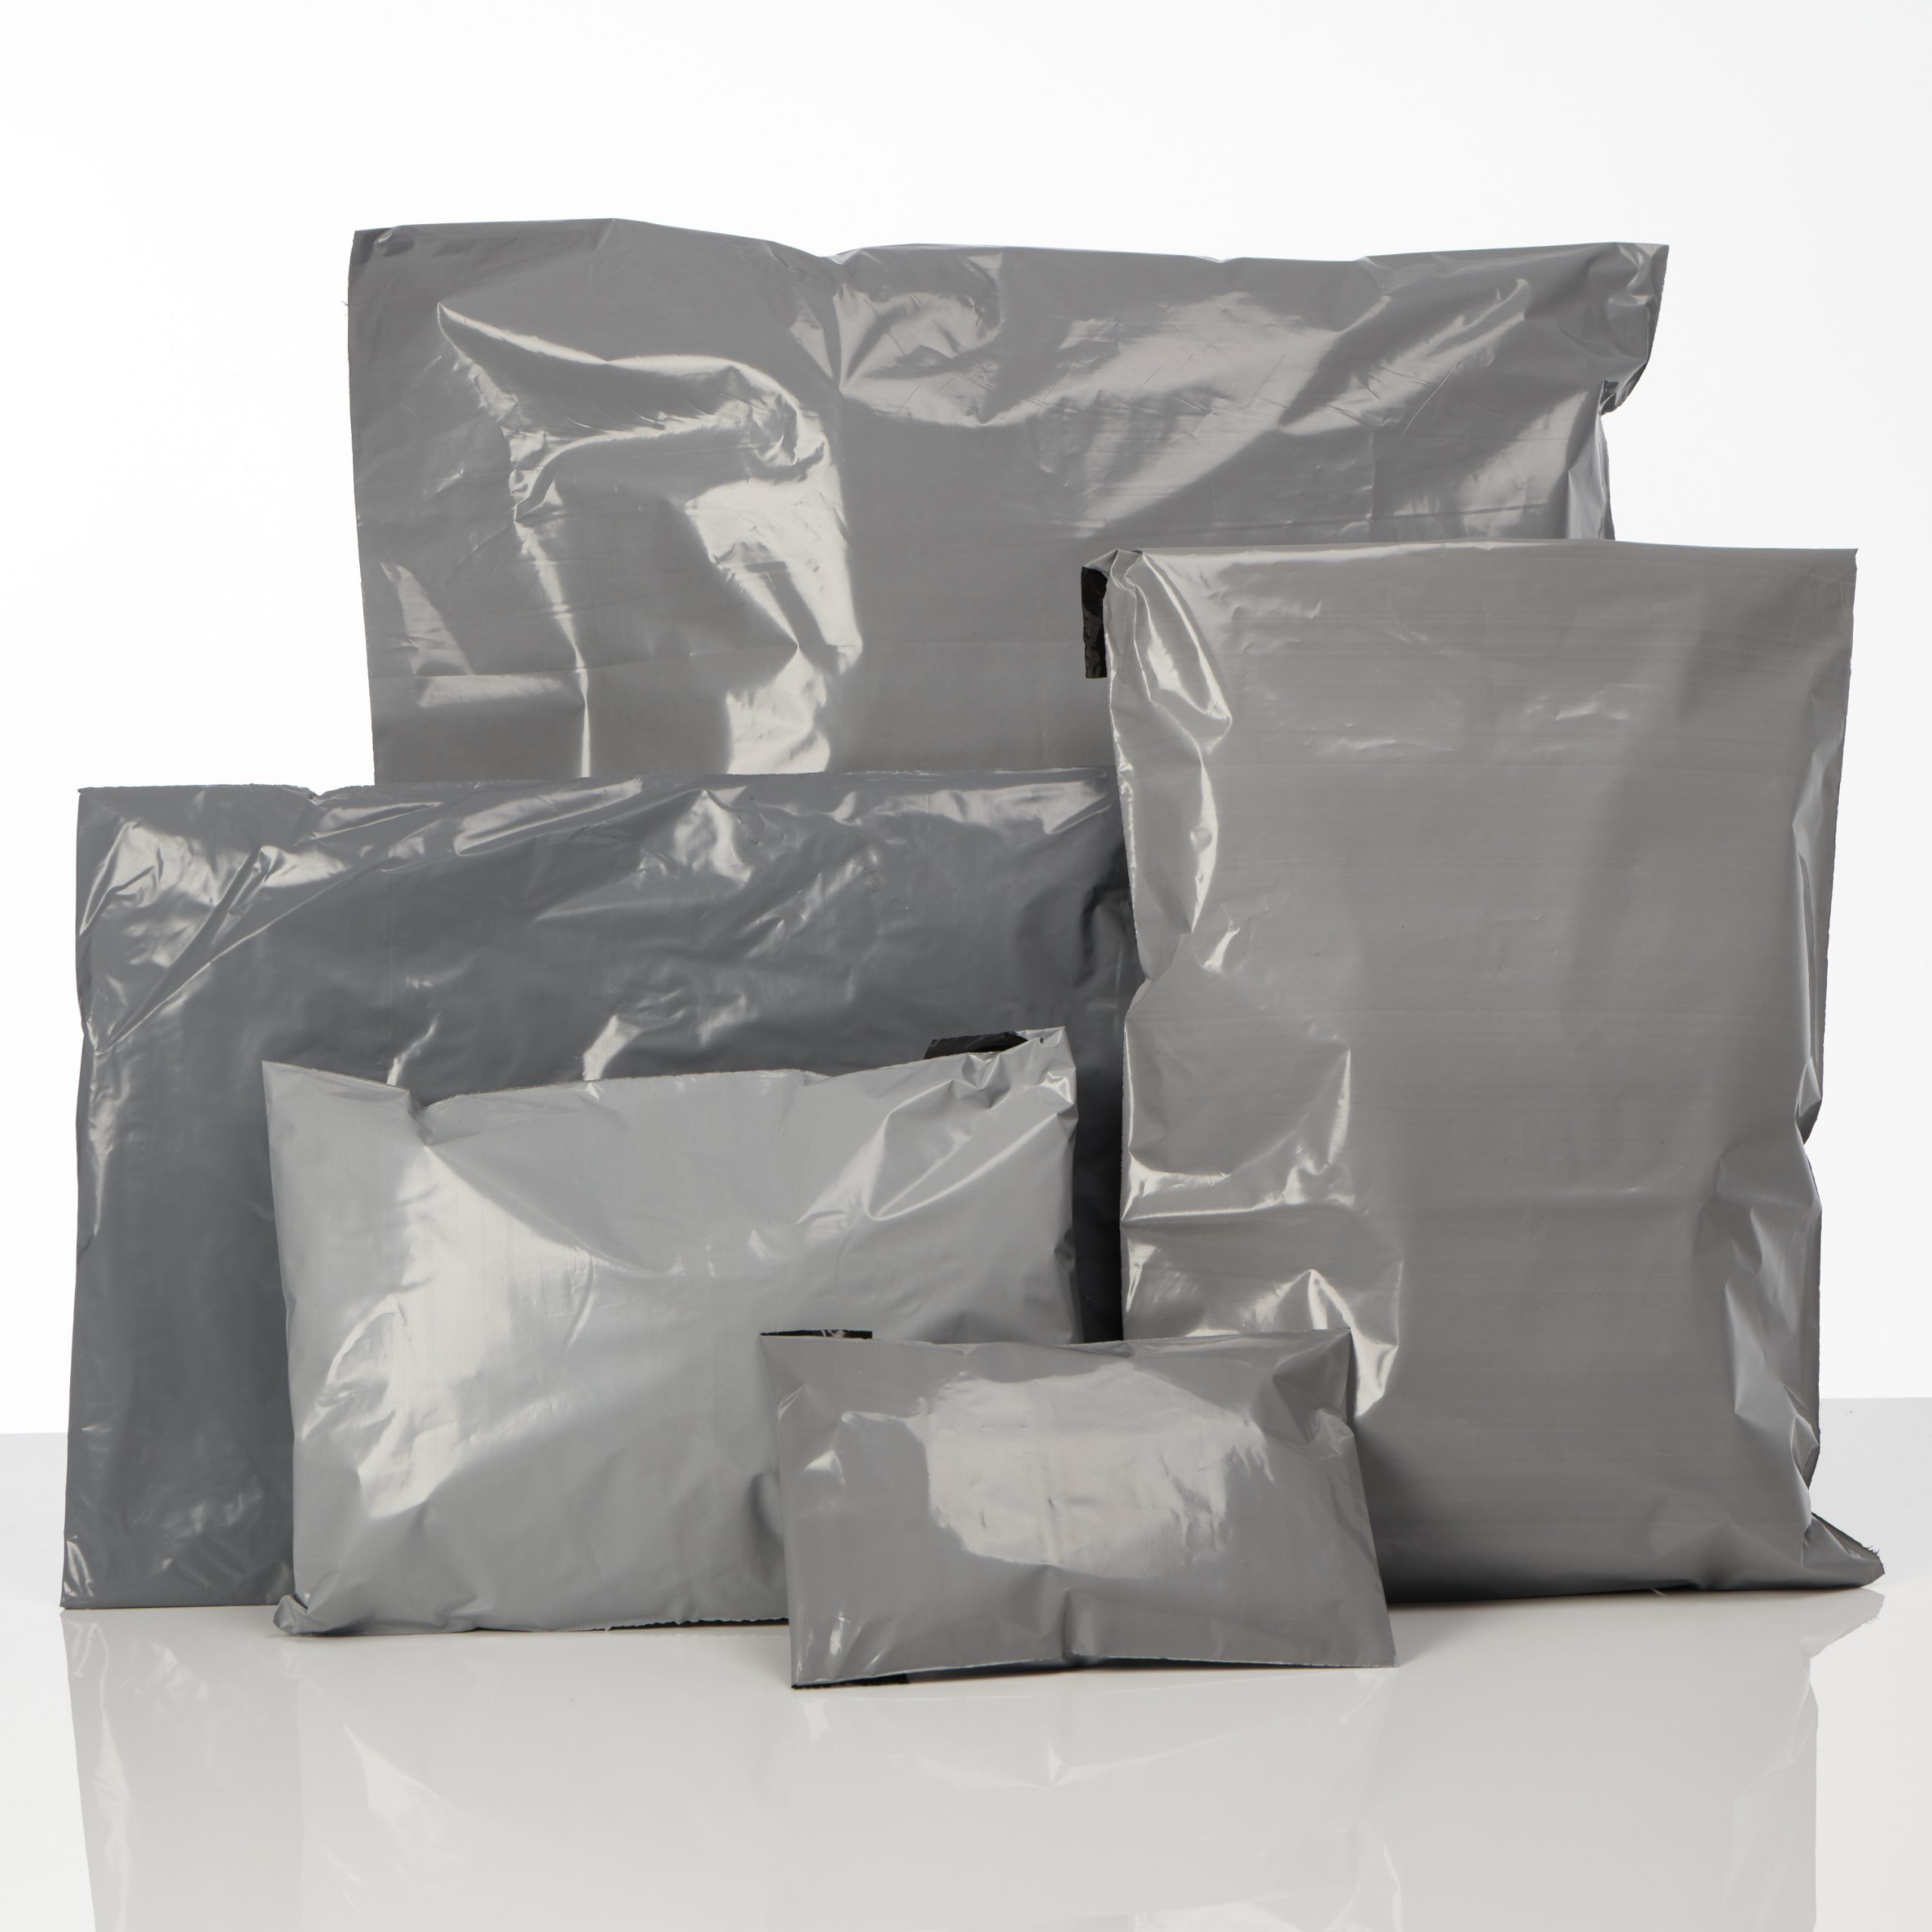 10X14 STRONG GREY PLASTIC MAILING BAGS POSTAGE HIGH DENSITY  SELF SEAL X30 BAGS 